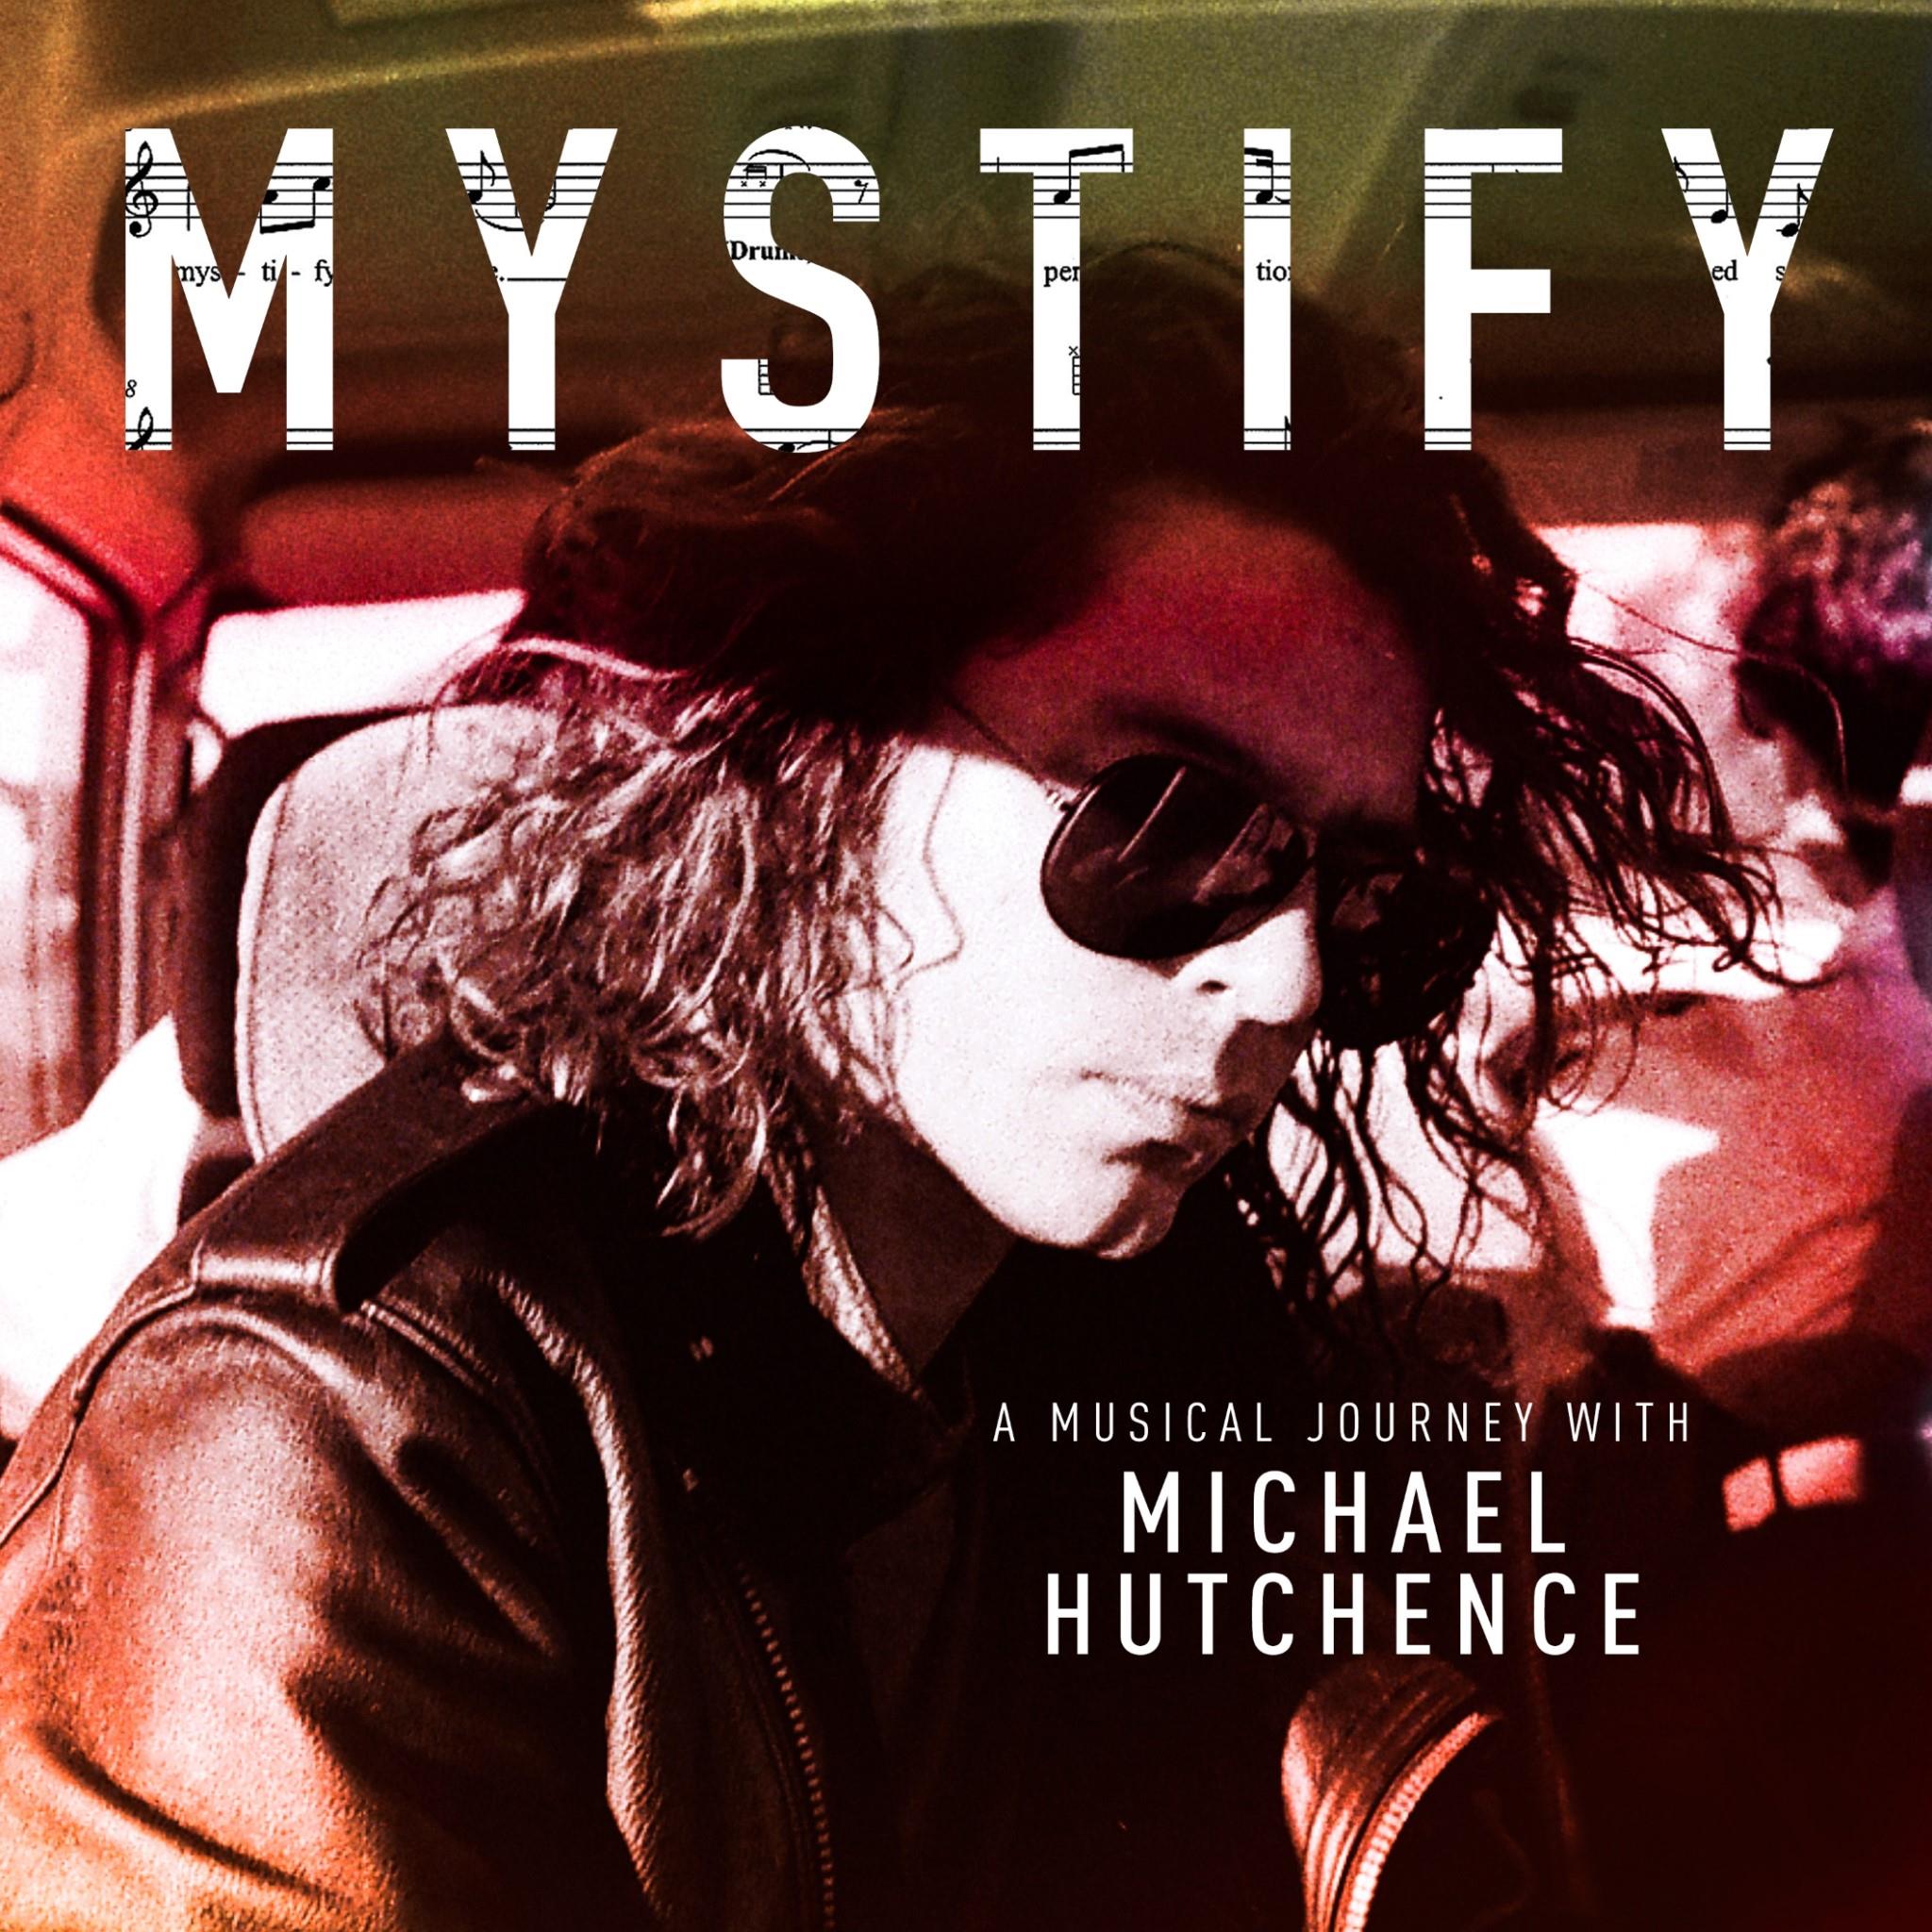 mystify – a musical journey with michael hutchence soundtrack